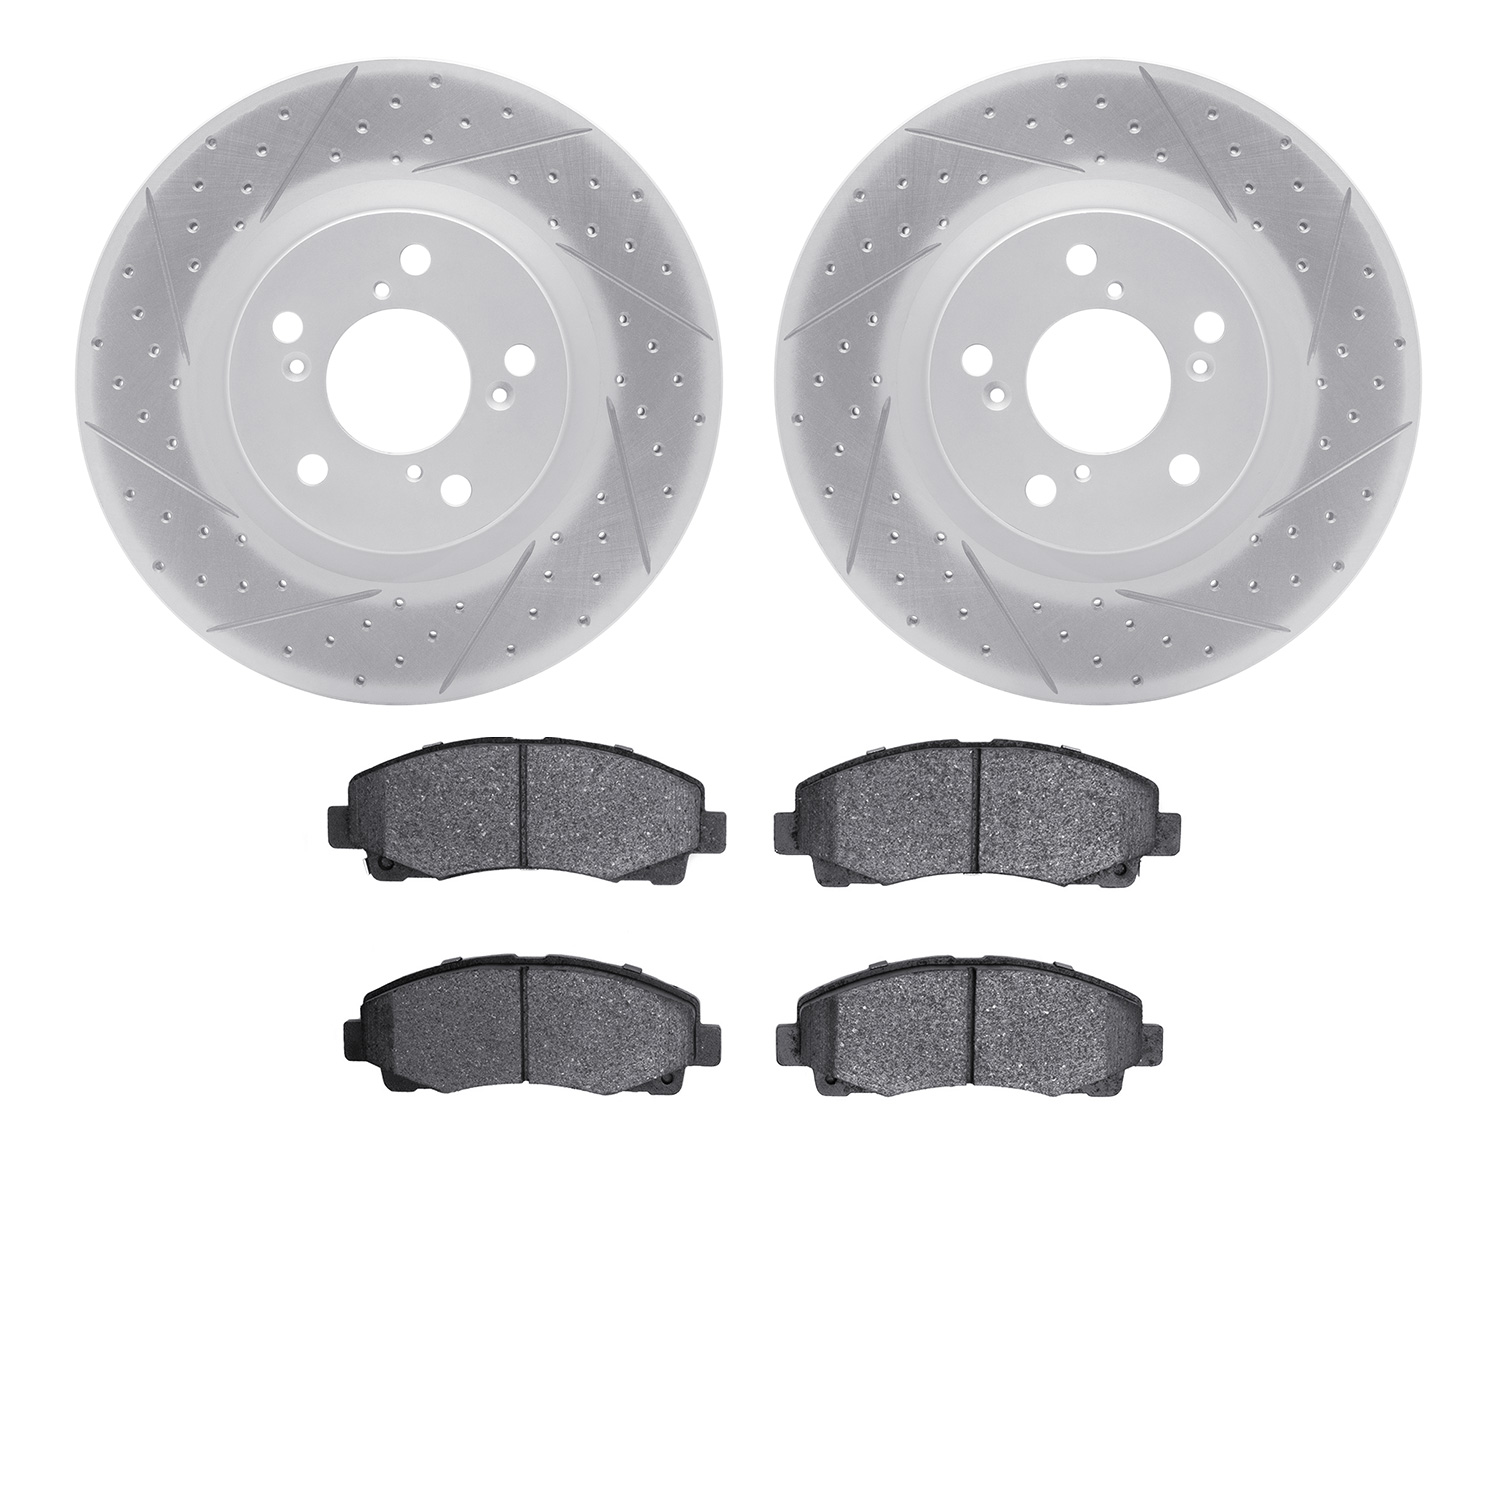 2502-59075 Geoperformance Drilled/Slotted Rotors w/5000 Advanced Brake Pads Kit, 2009-2014 Acura/Honda, Position: Front